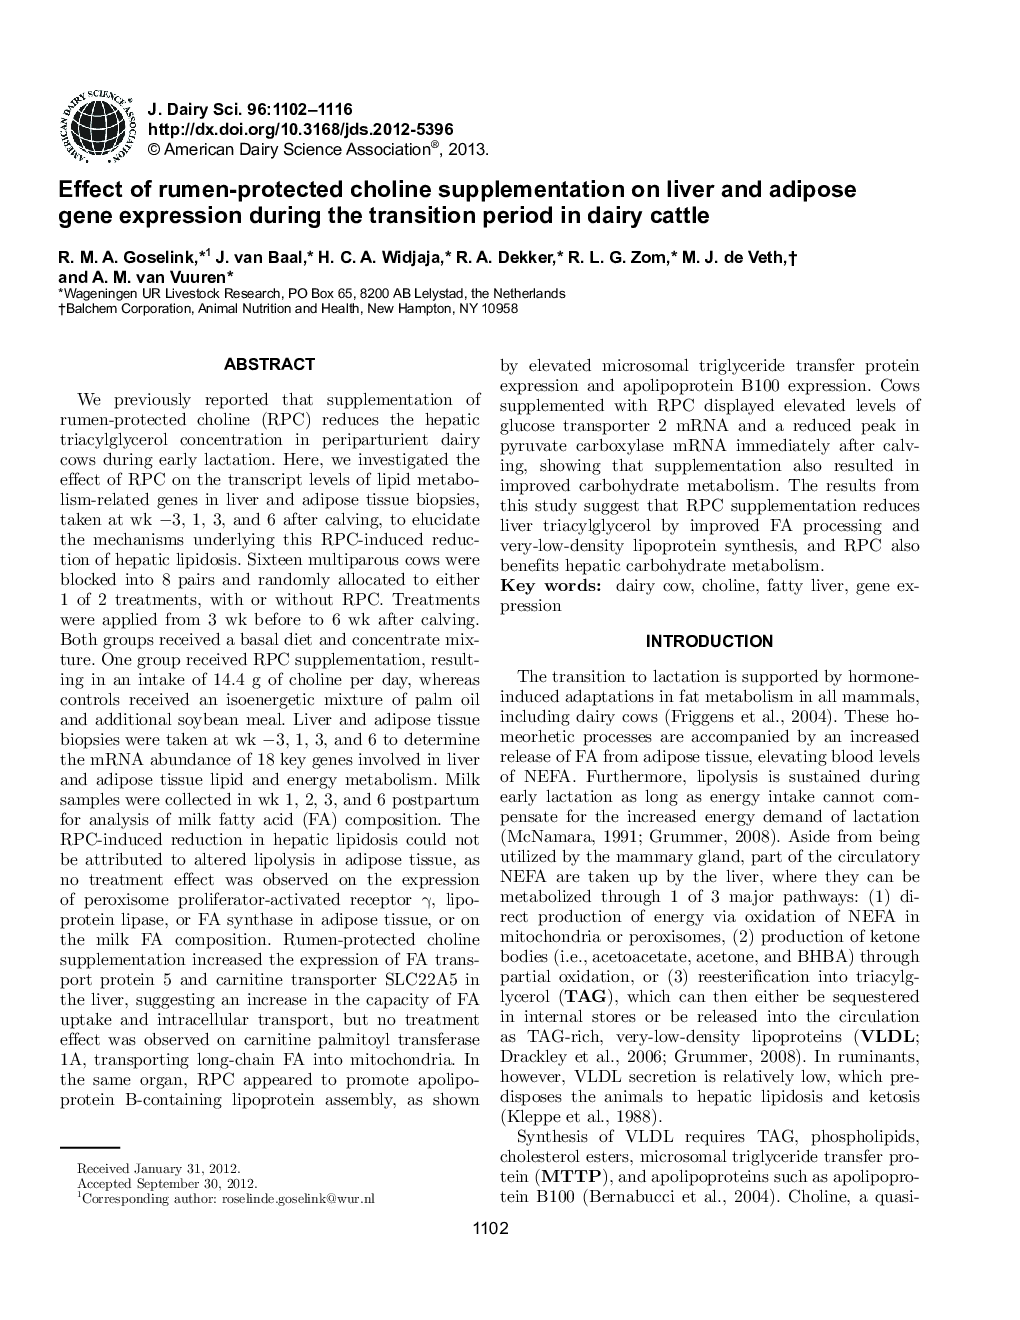 Effect of rumen-protected choline supplementation on liver and adipose gene expression during the transition period in dairy cattle